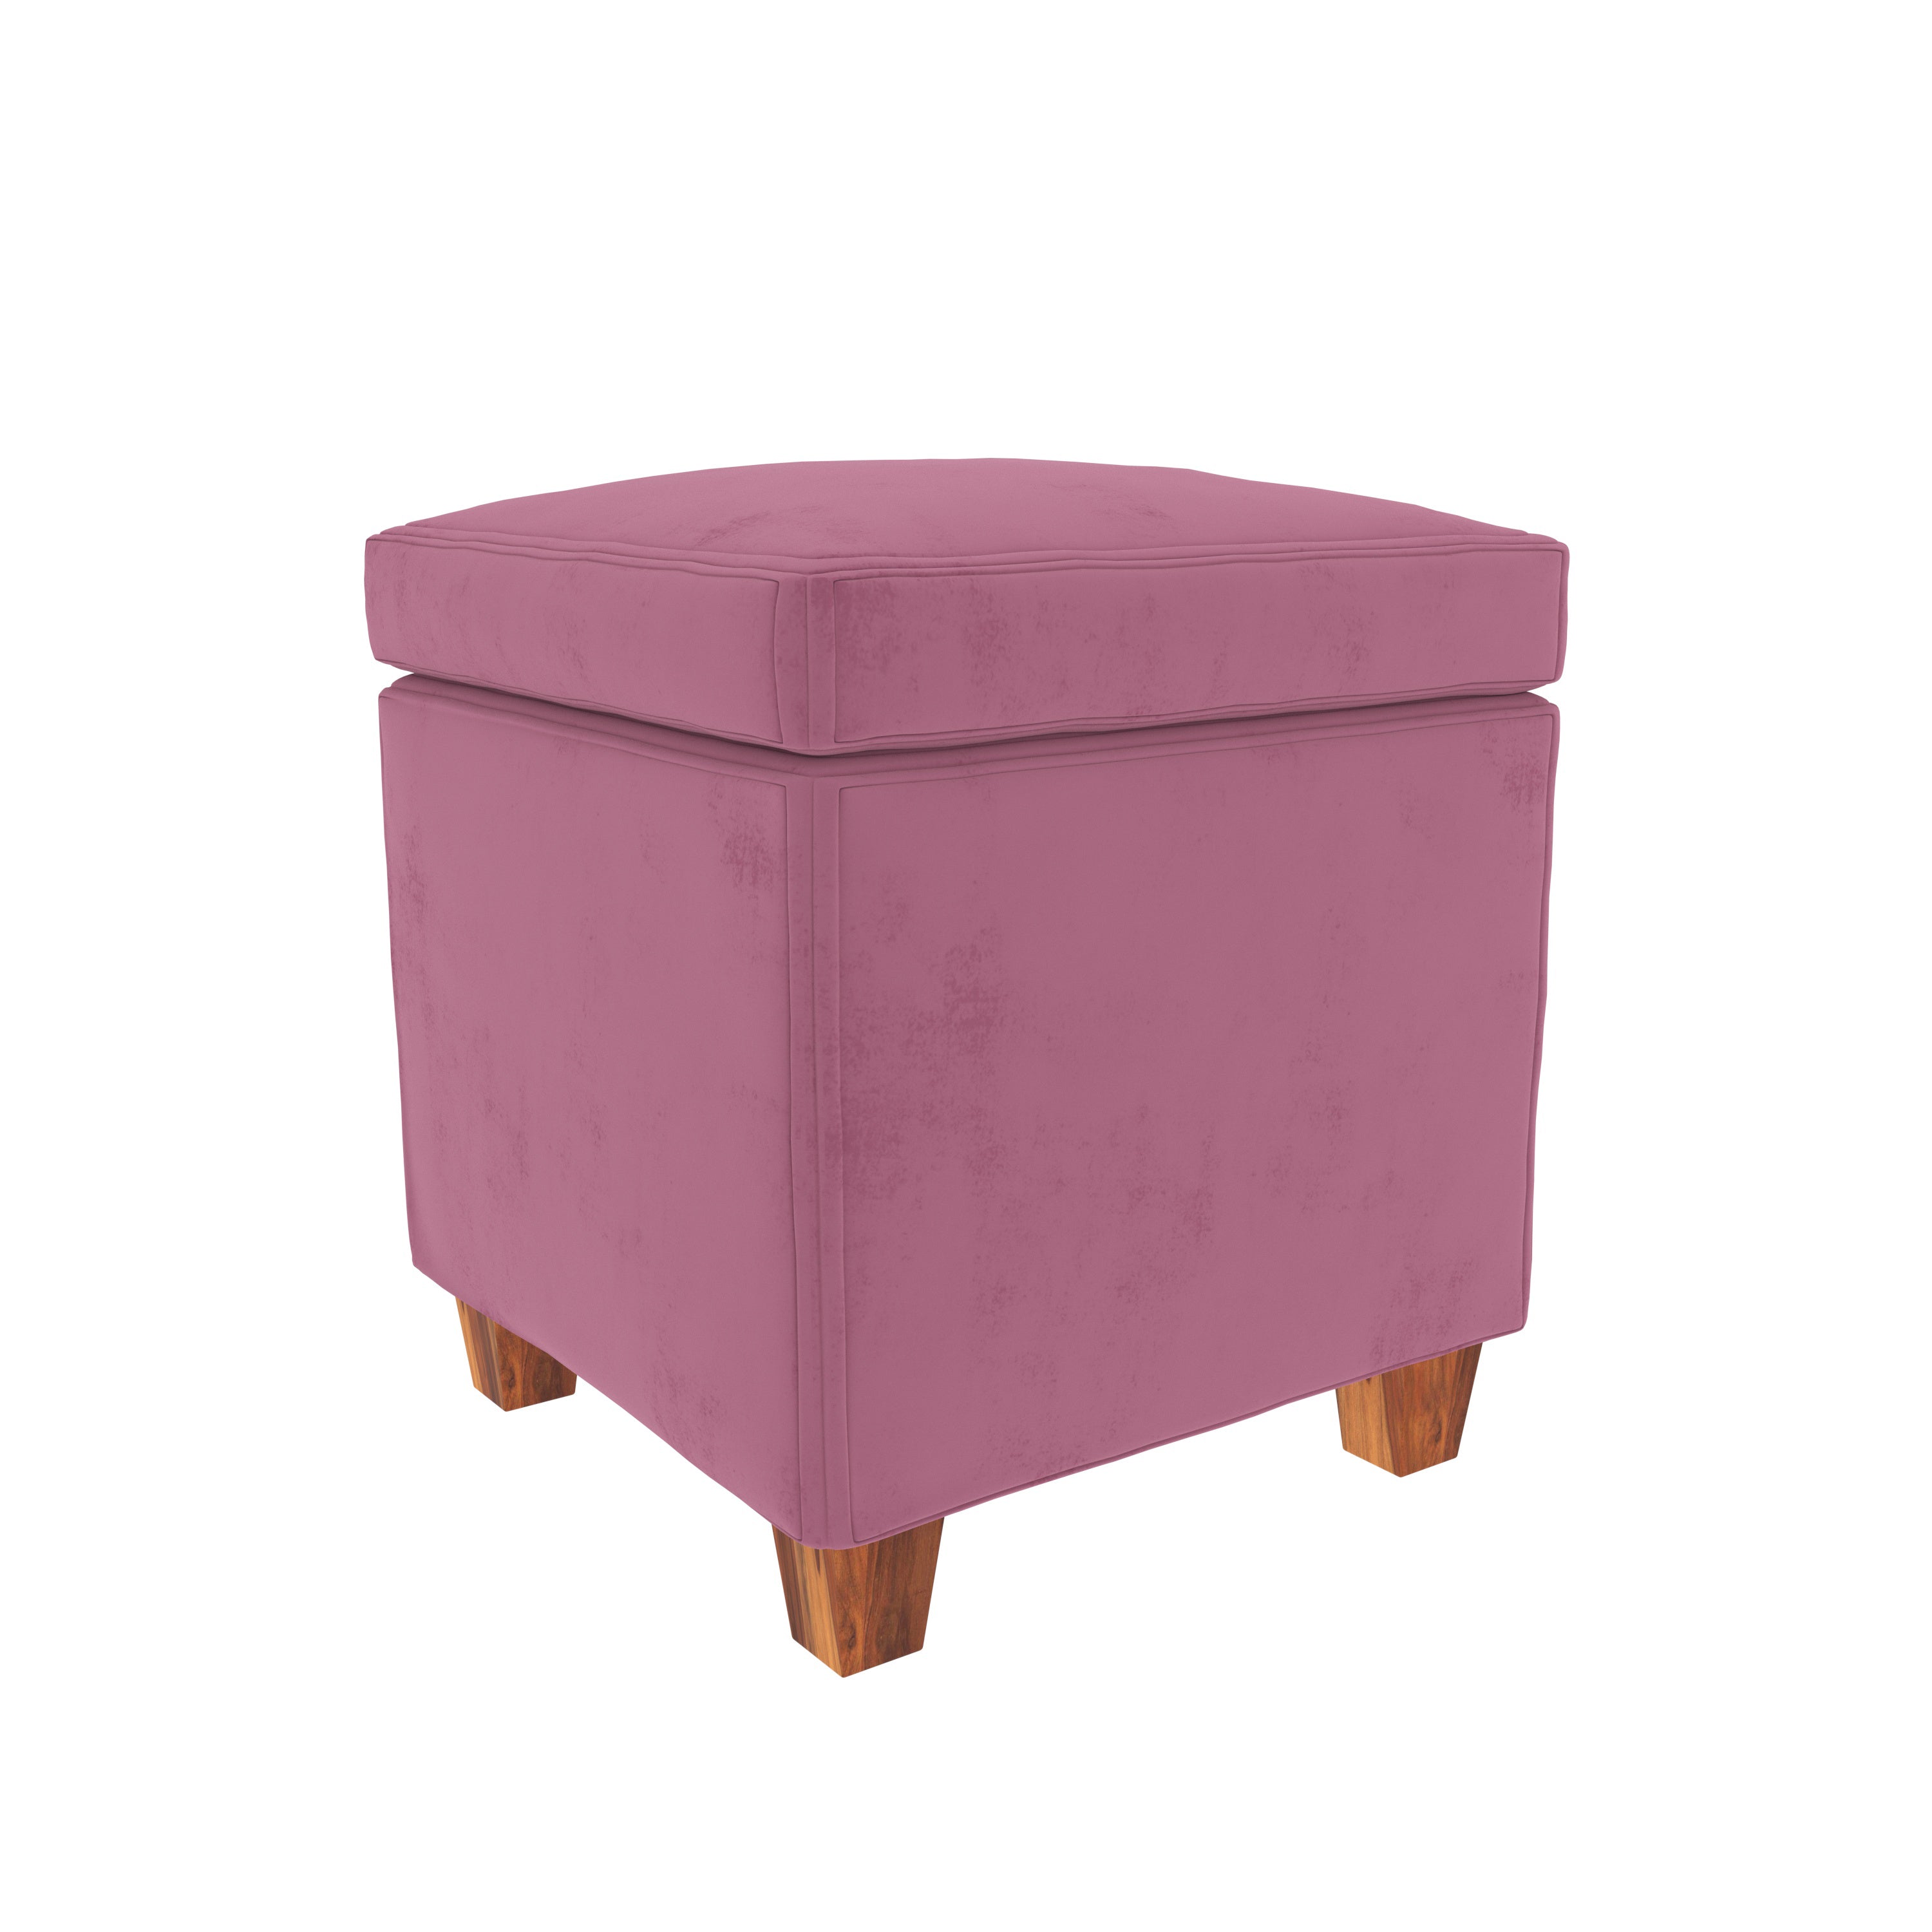 Peter Pink Wooden Smooth Finish Light Seating Stool Pouf